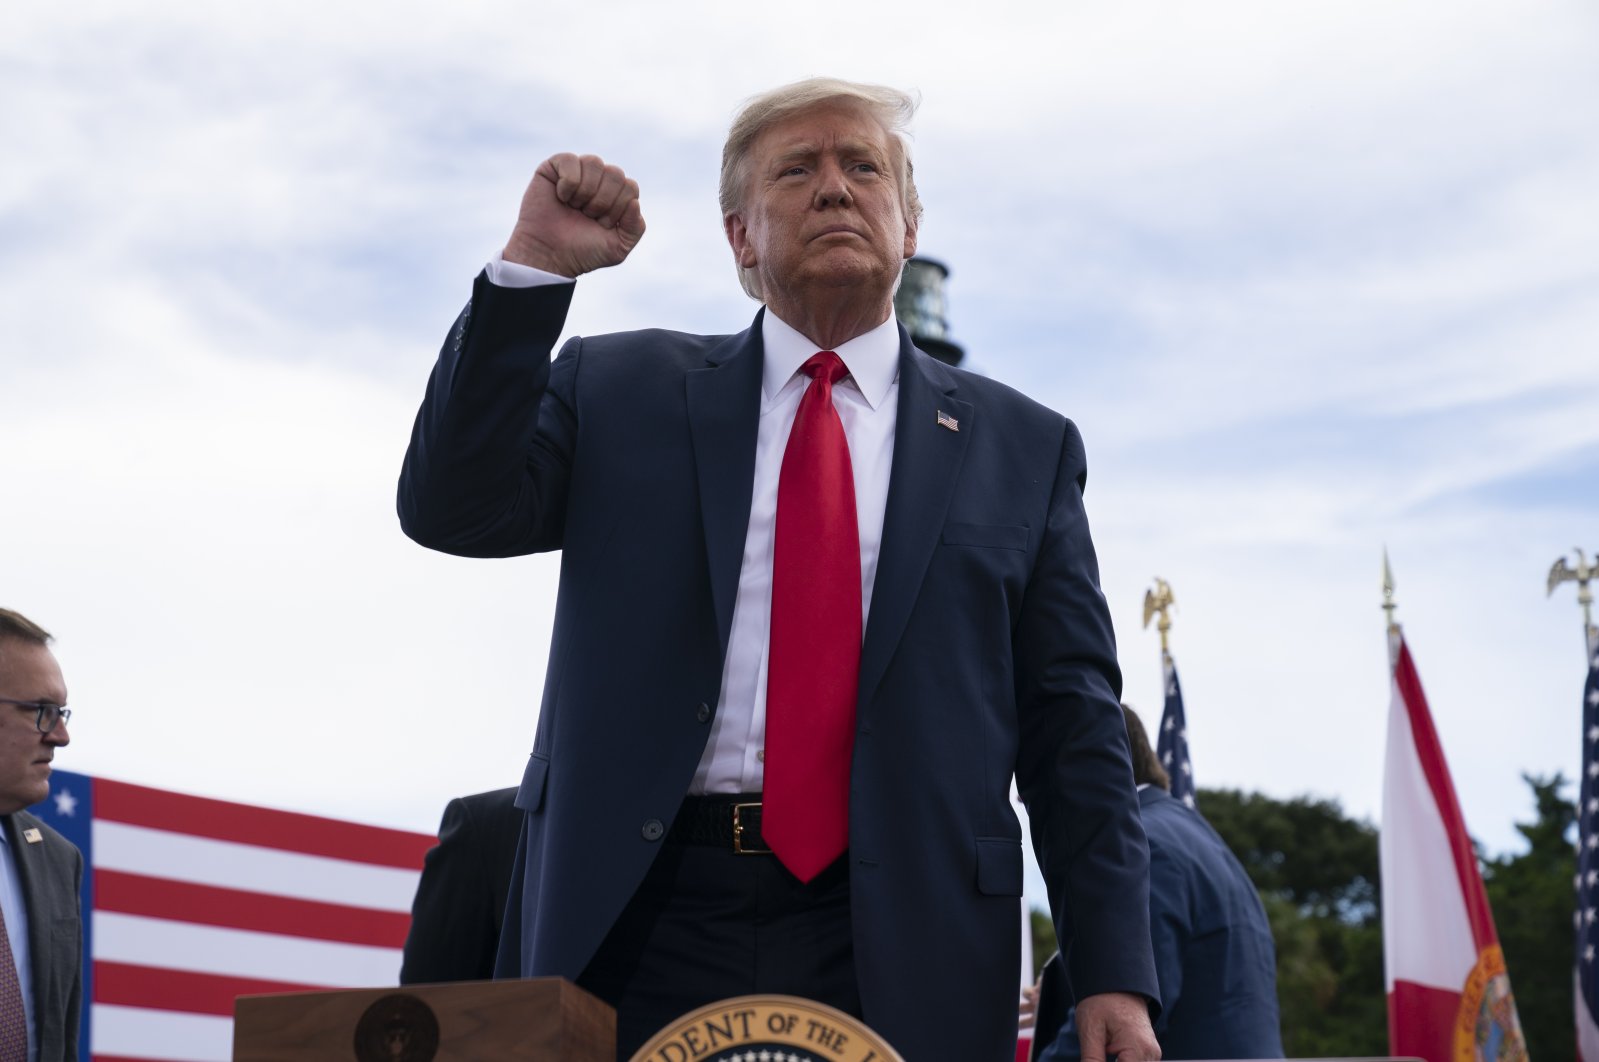 President Donald Trump pumps his fist after signing an executive order on protecting Florida coastline from offshore drilling after delivering remarks on the environment at Jupiter Inlet Lighthouse and Museum, Tuesday, Sept. 8, 2020. (AP Photo)